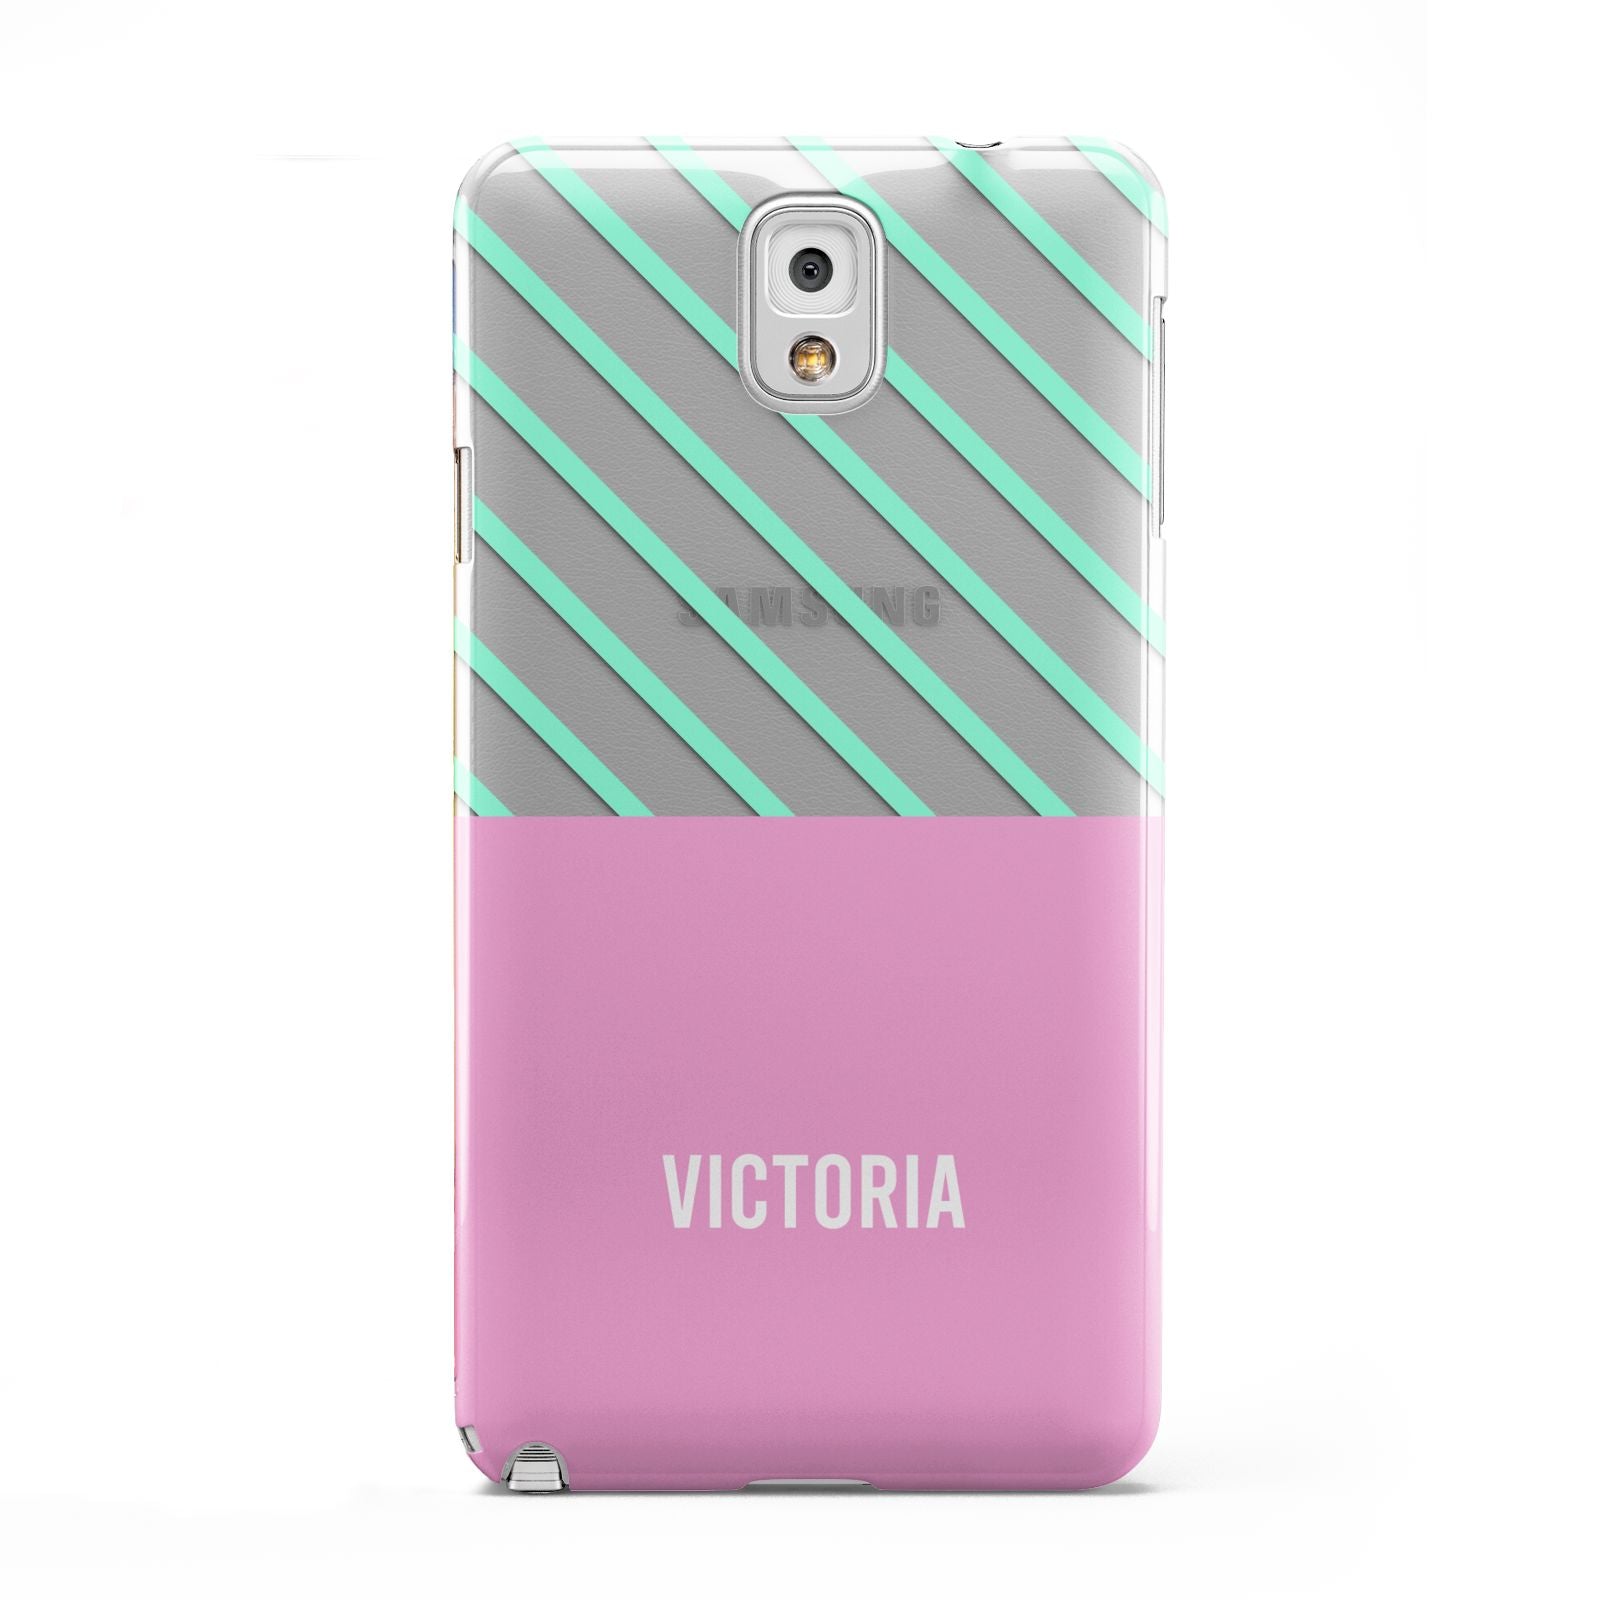 Personalised Pink Aqua Striped Samsung Galaxy Note 3 Case